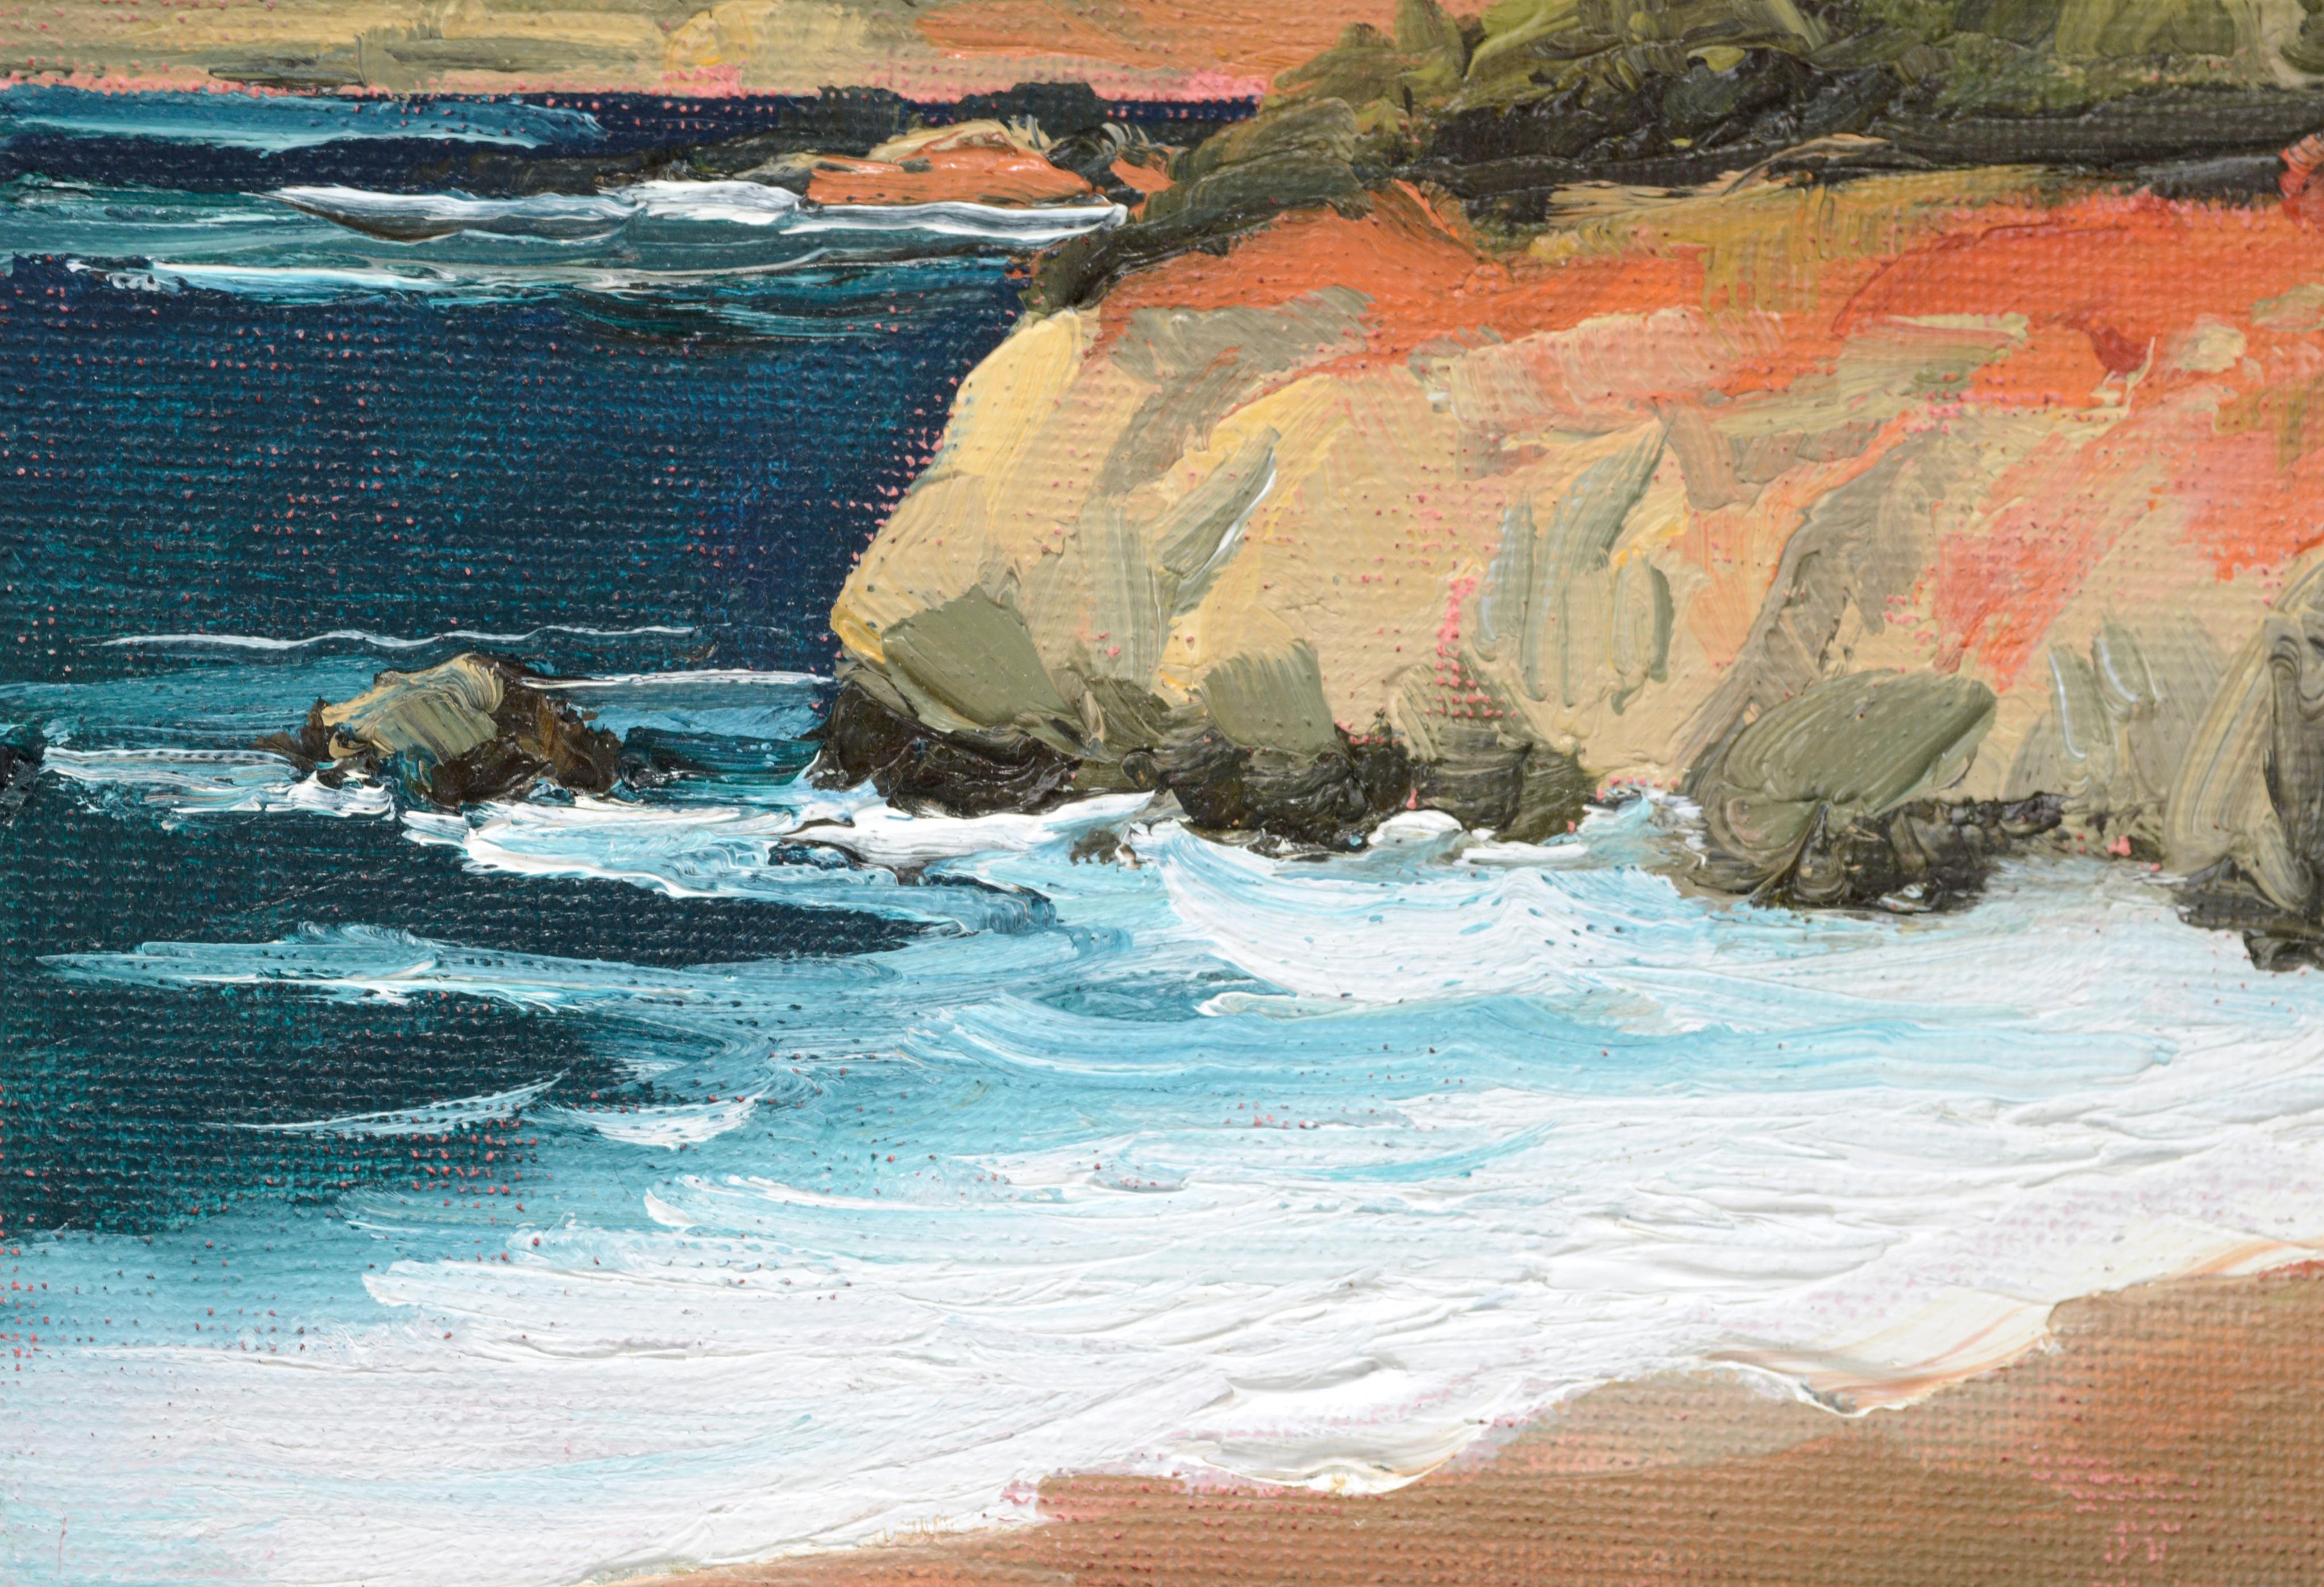 Miniature landscape of Big Sur cliffs by Kathleen Murray (American, b. 1958). Signed 